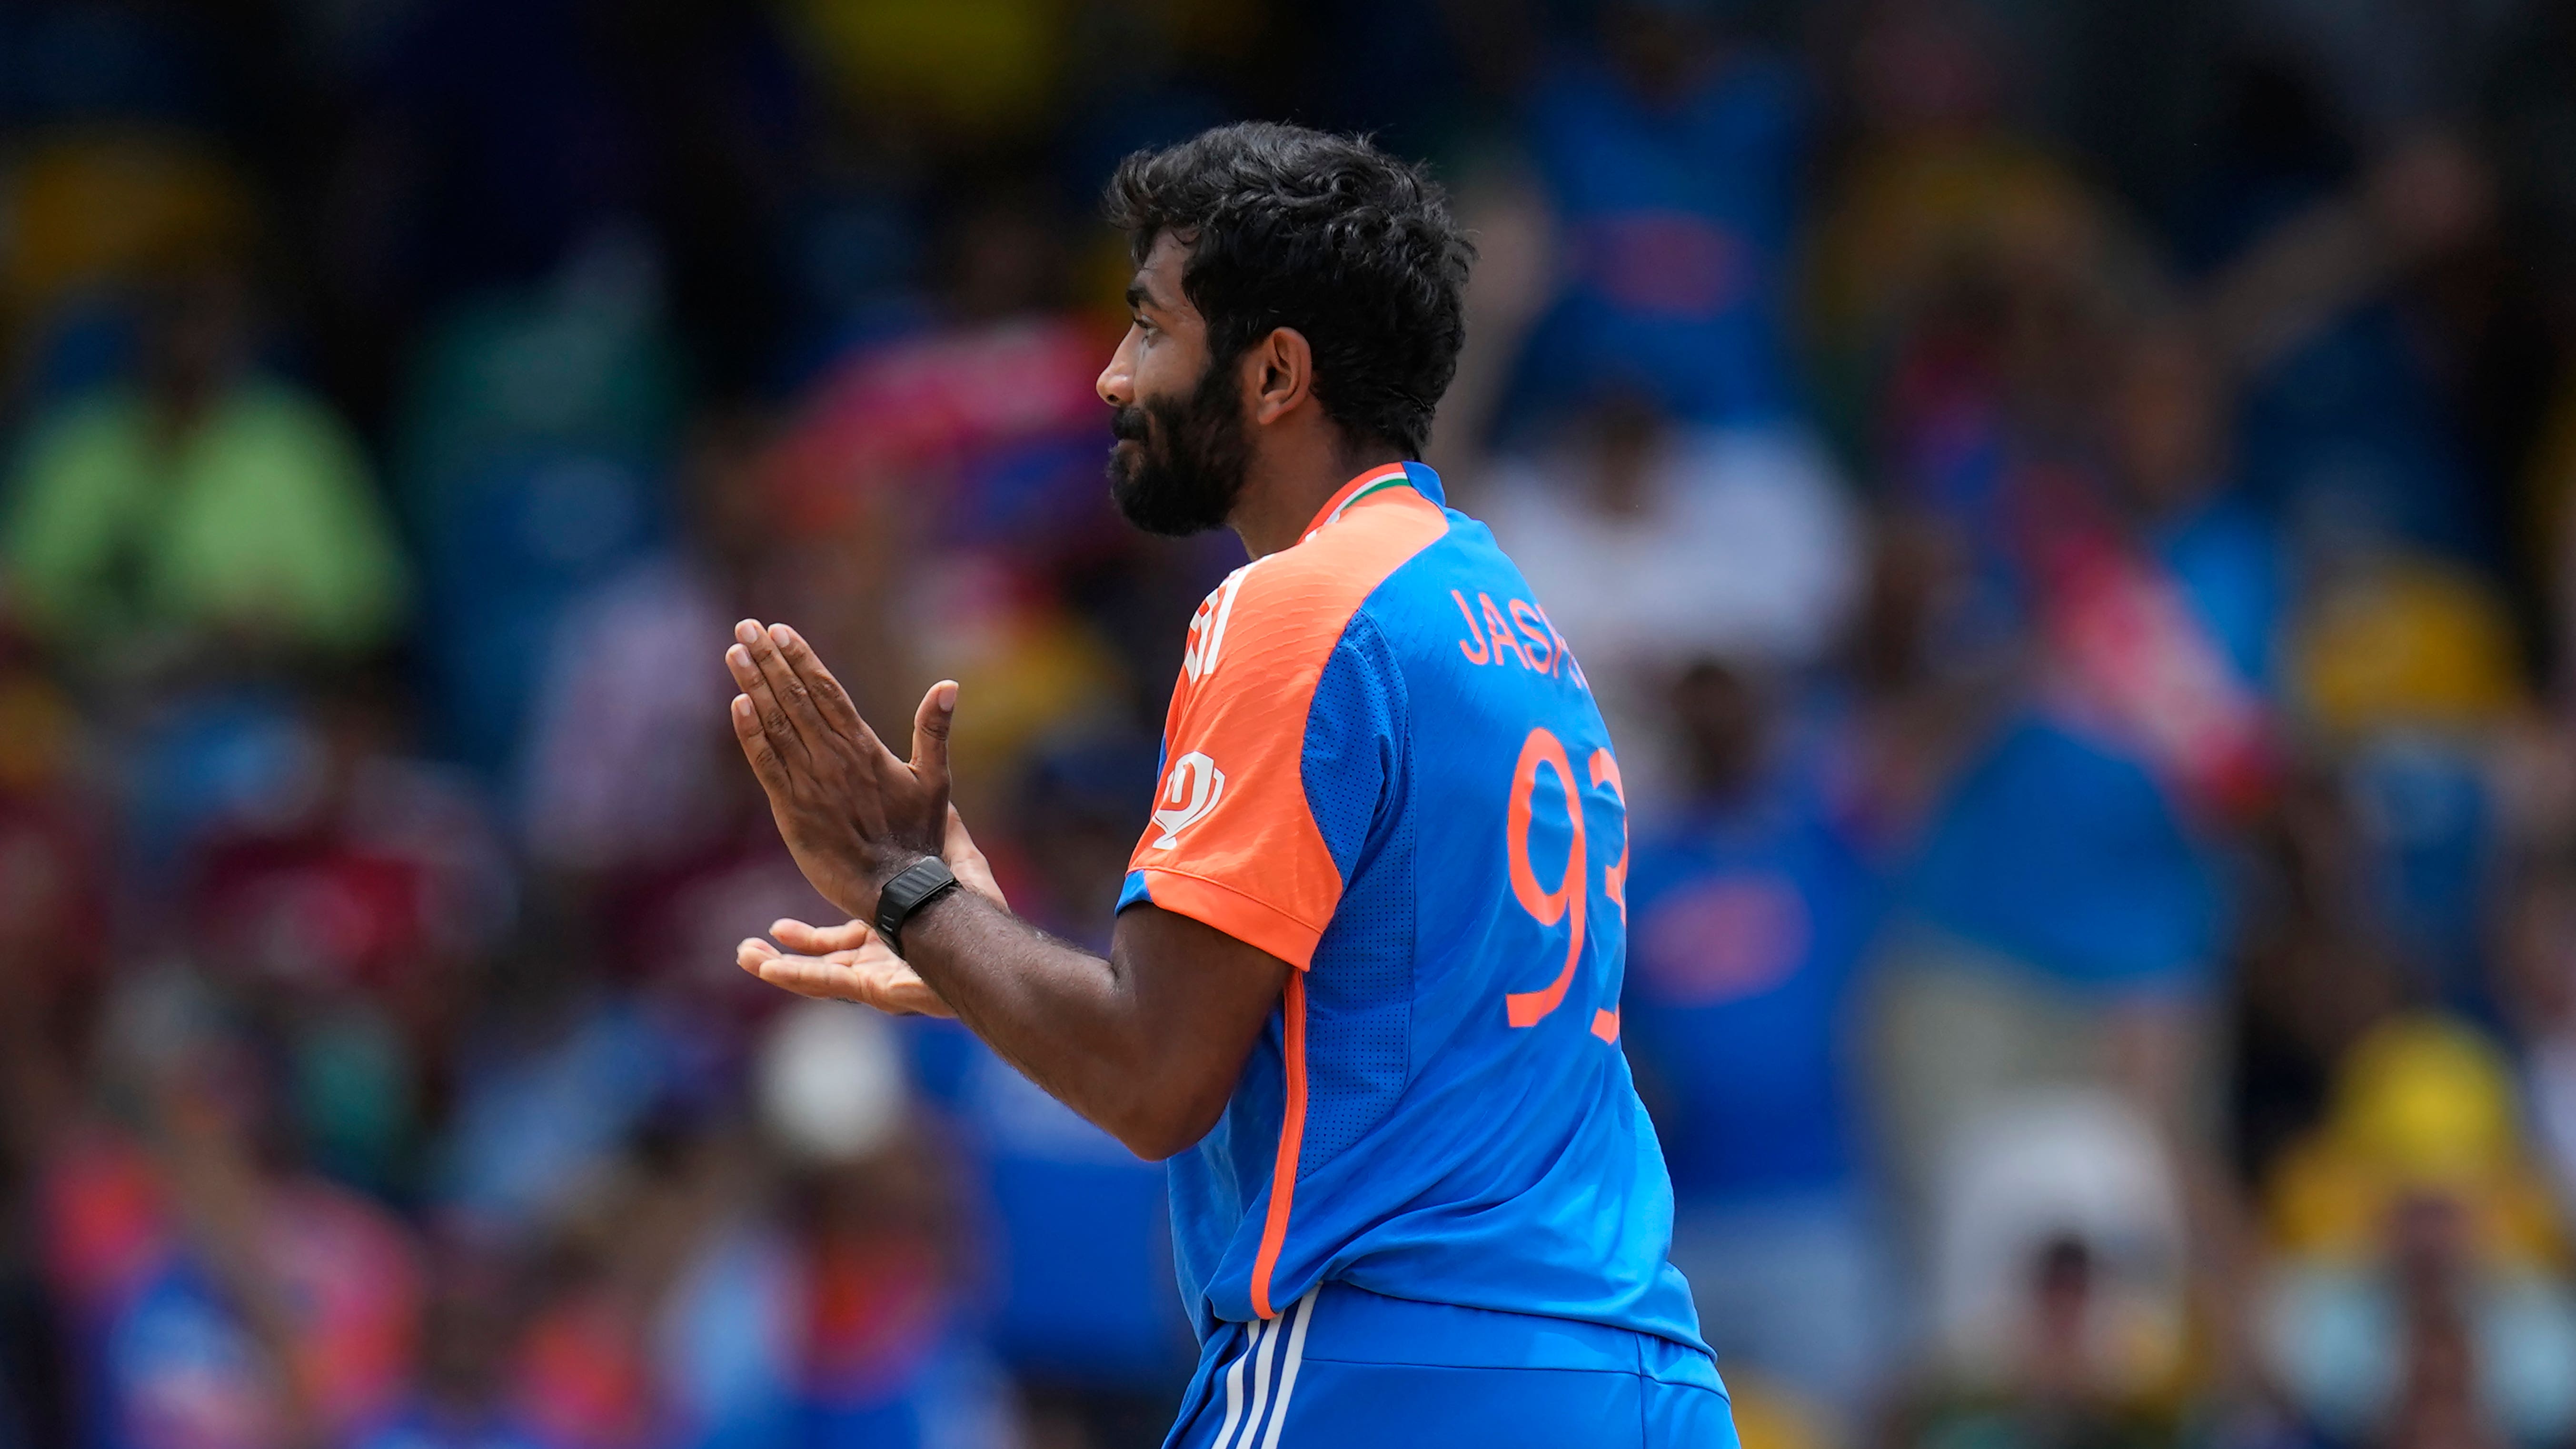 Jasprit Bumrah’s fine spell helps India beat South Africa in T20 World Cup final